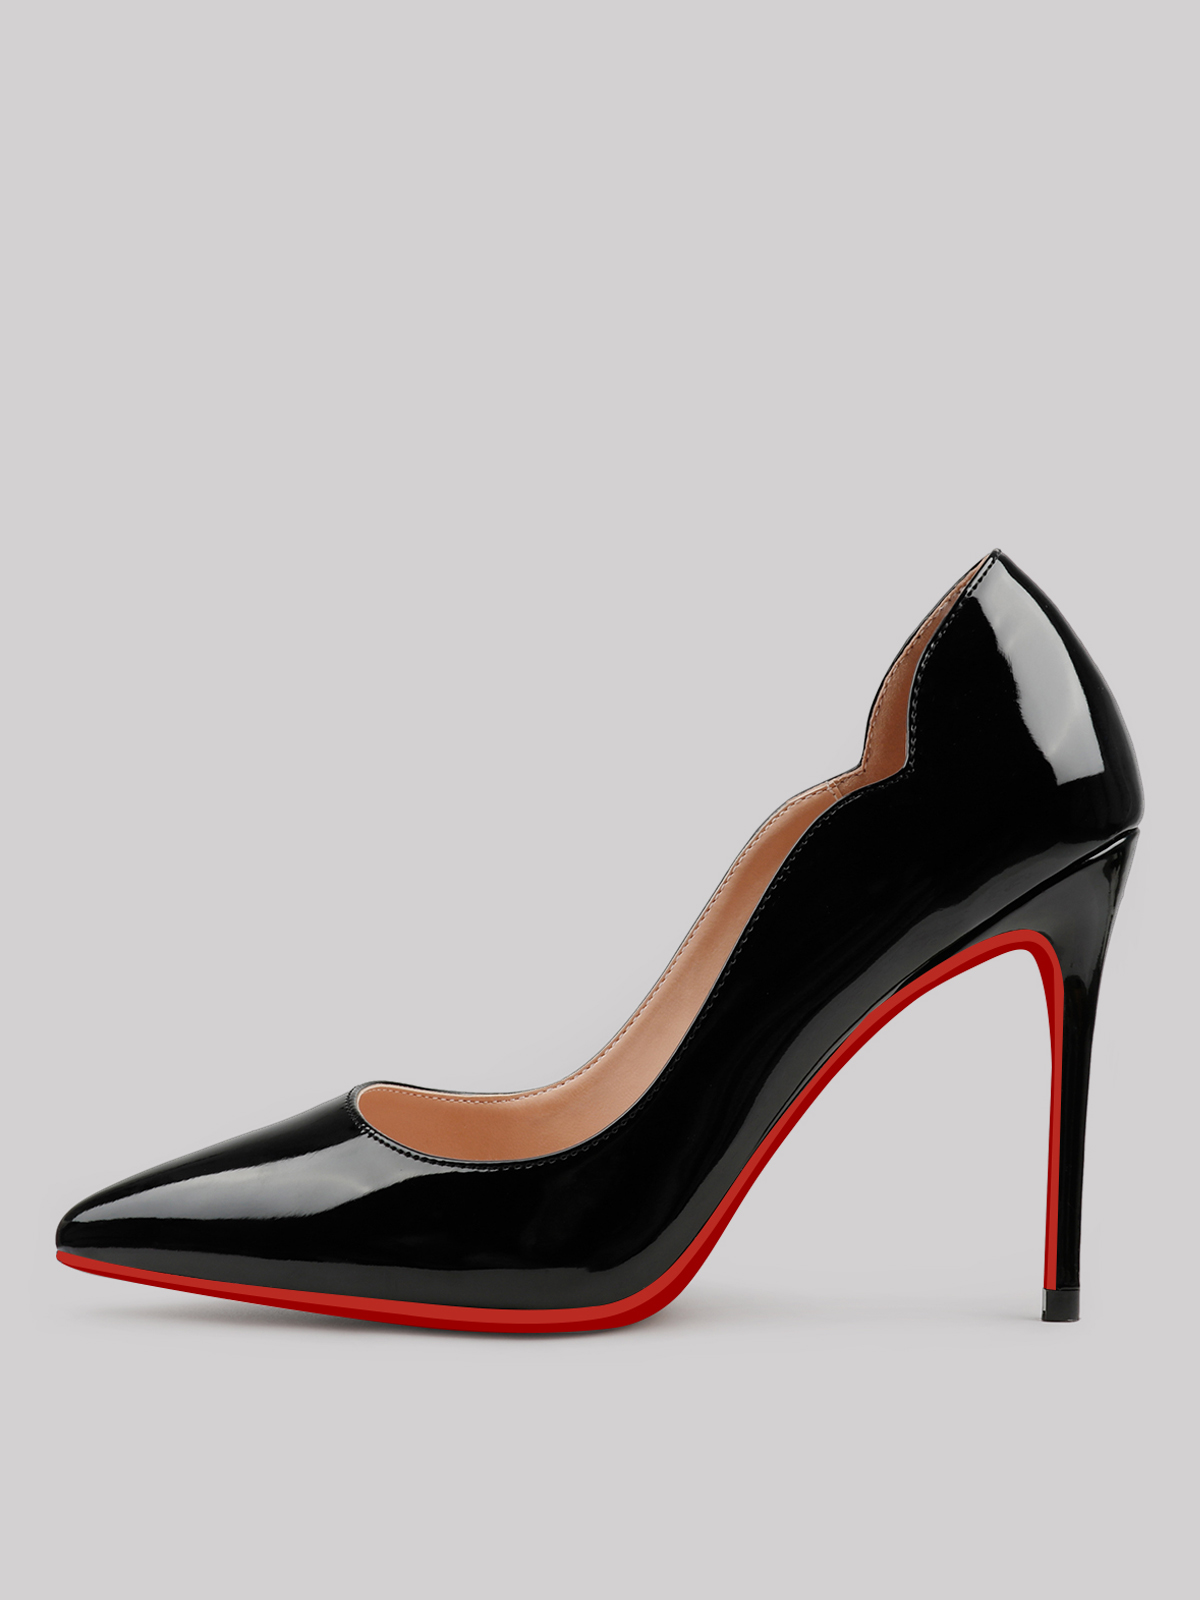 100mm Women's High Heels for Party Wedding Patent Red Bottom Pumps Black-US10.5